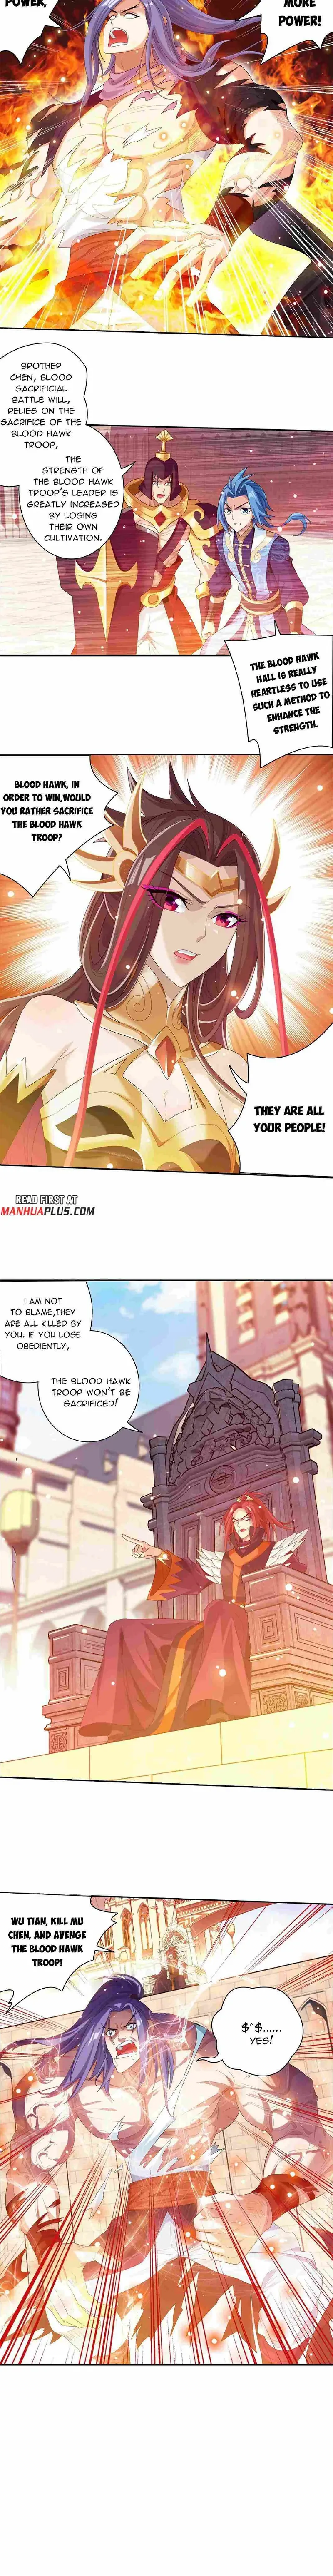 The Great Ruler Chapter 402 page 7